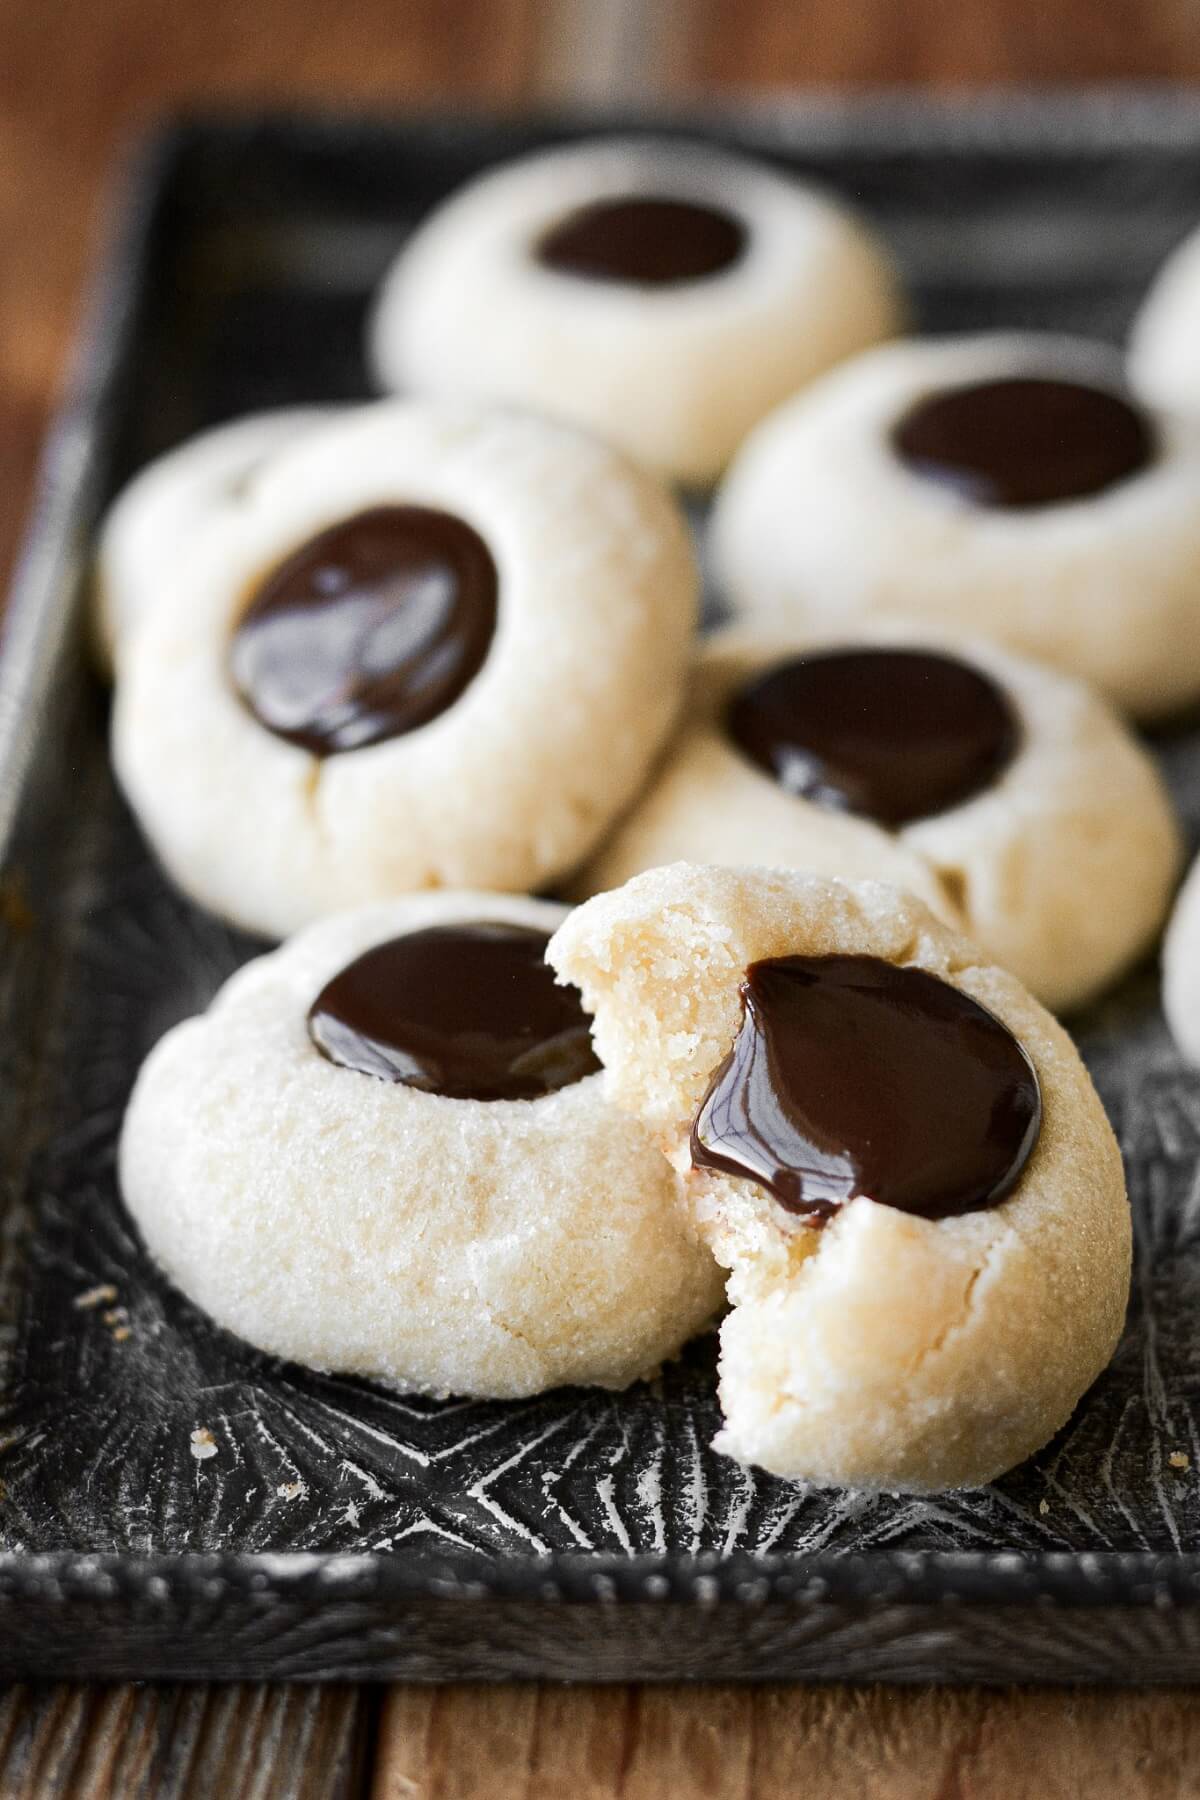 Chocolate thumbprint cookies, one with a bite taken.